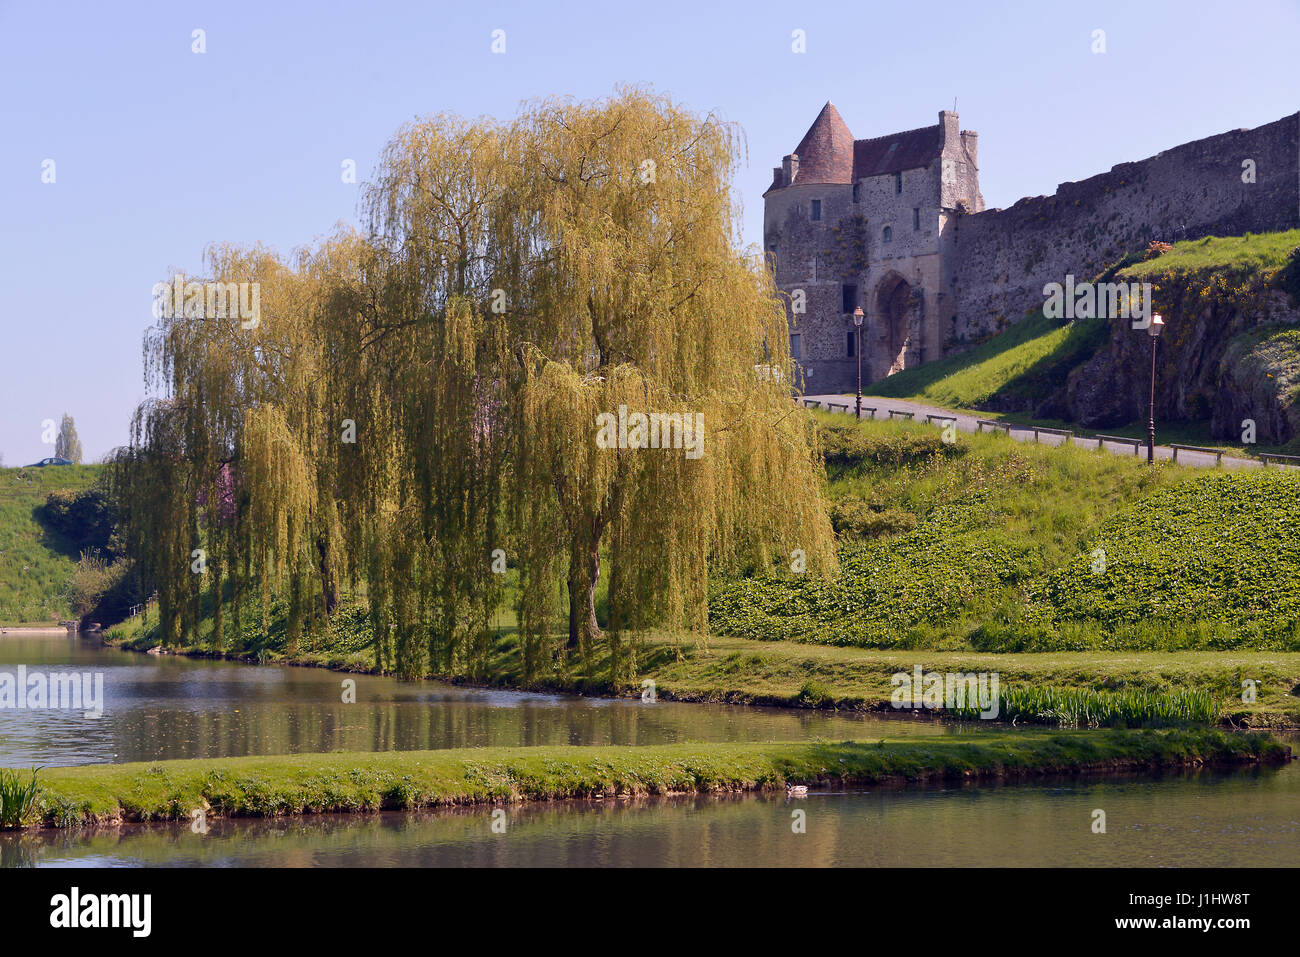 Castle of William the Conqueror and pond of Falaise, a commune in the Calvados department in the Basse-Normandie region in northwestern France Stock Photo